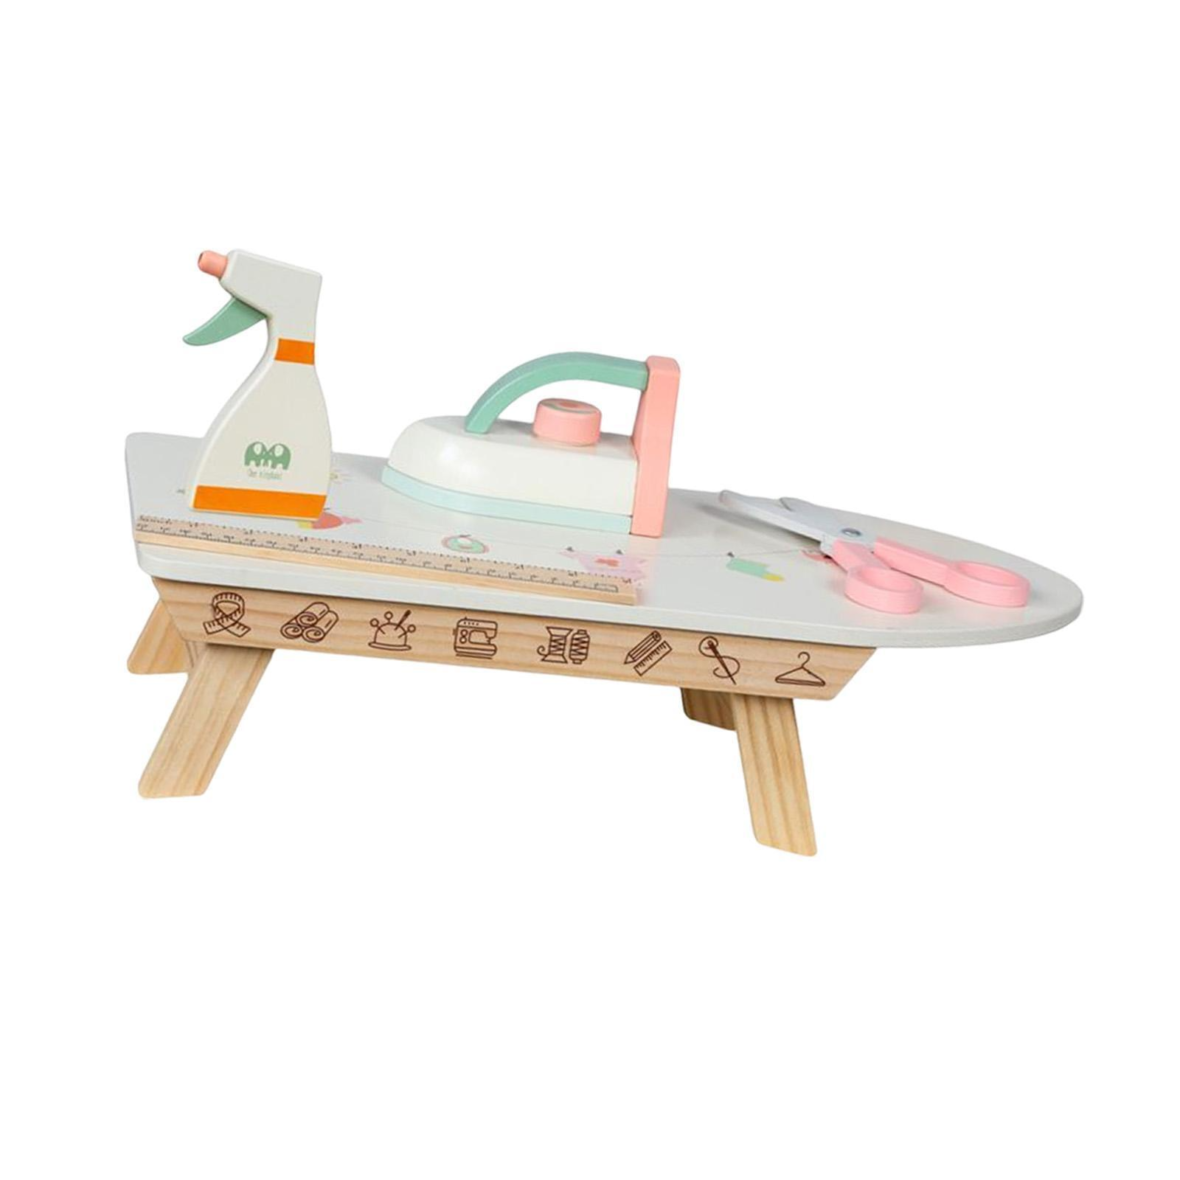 Ironing Board Pretended Play Game